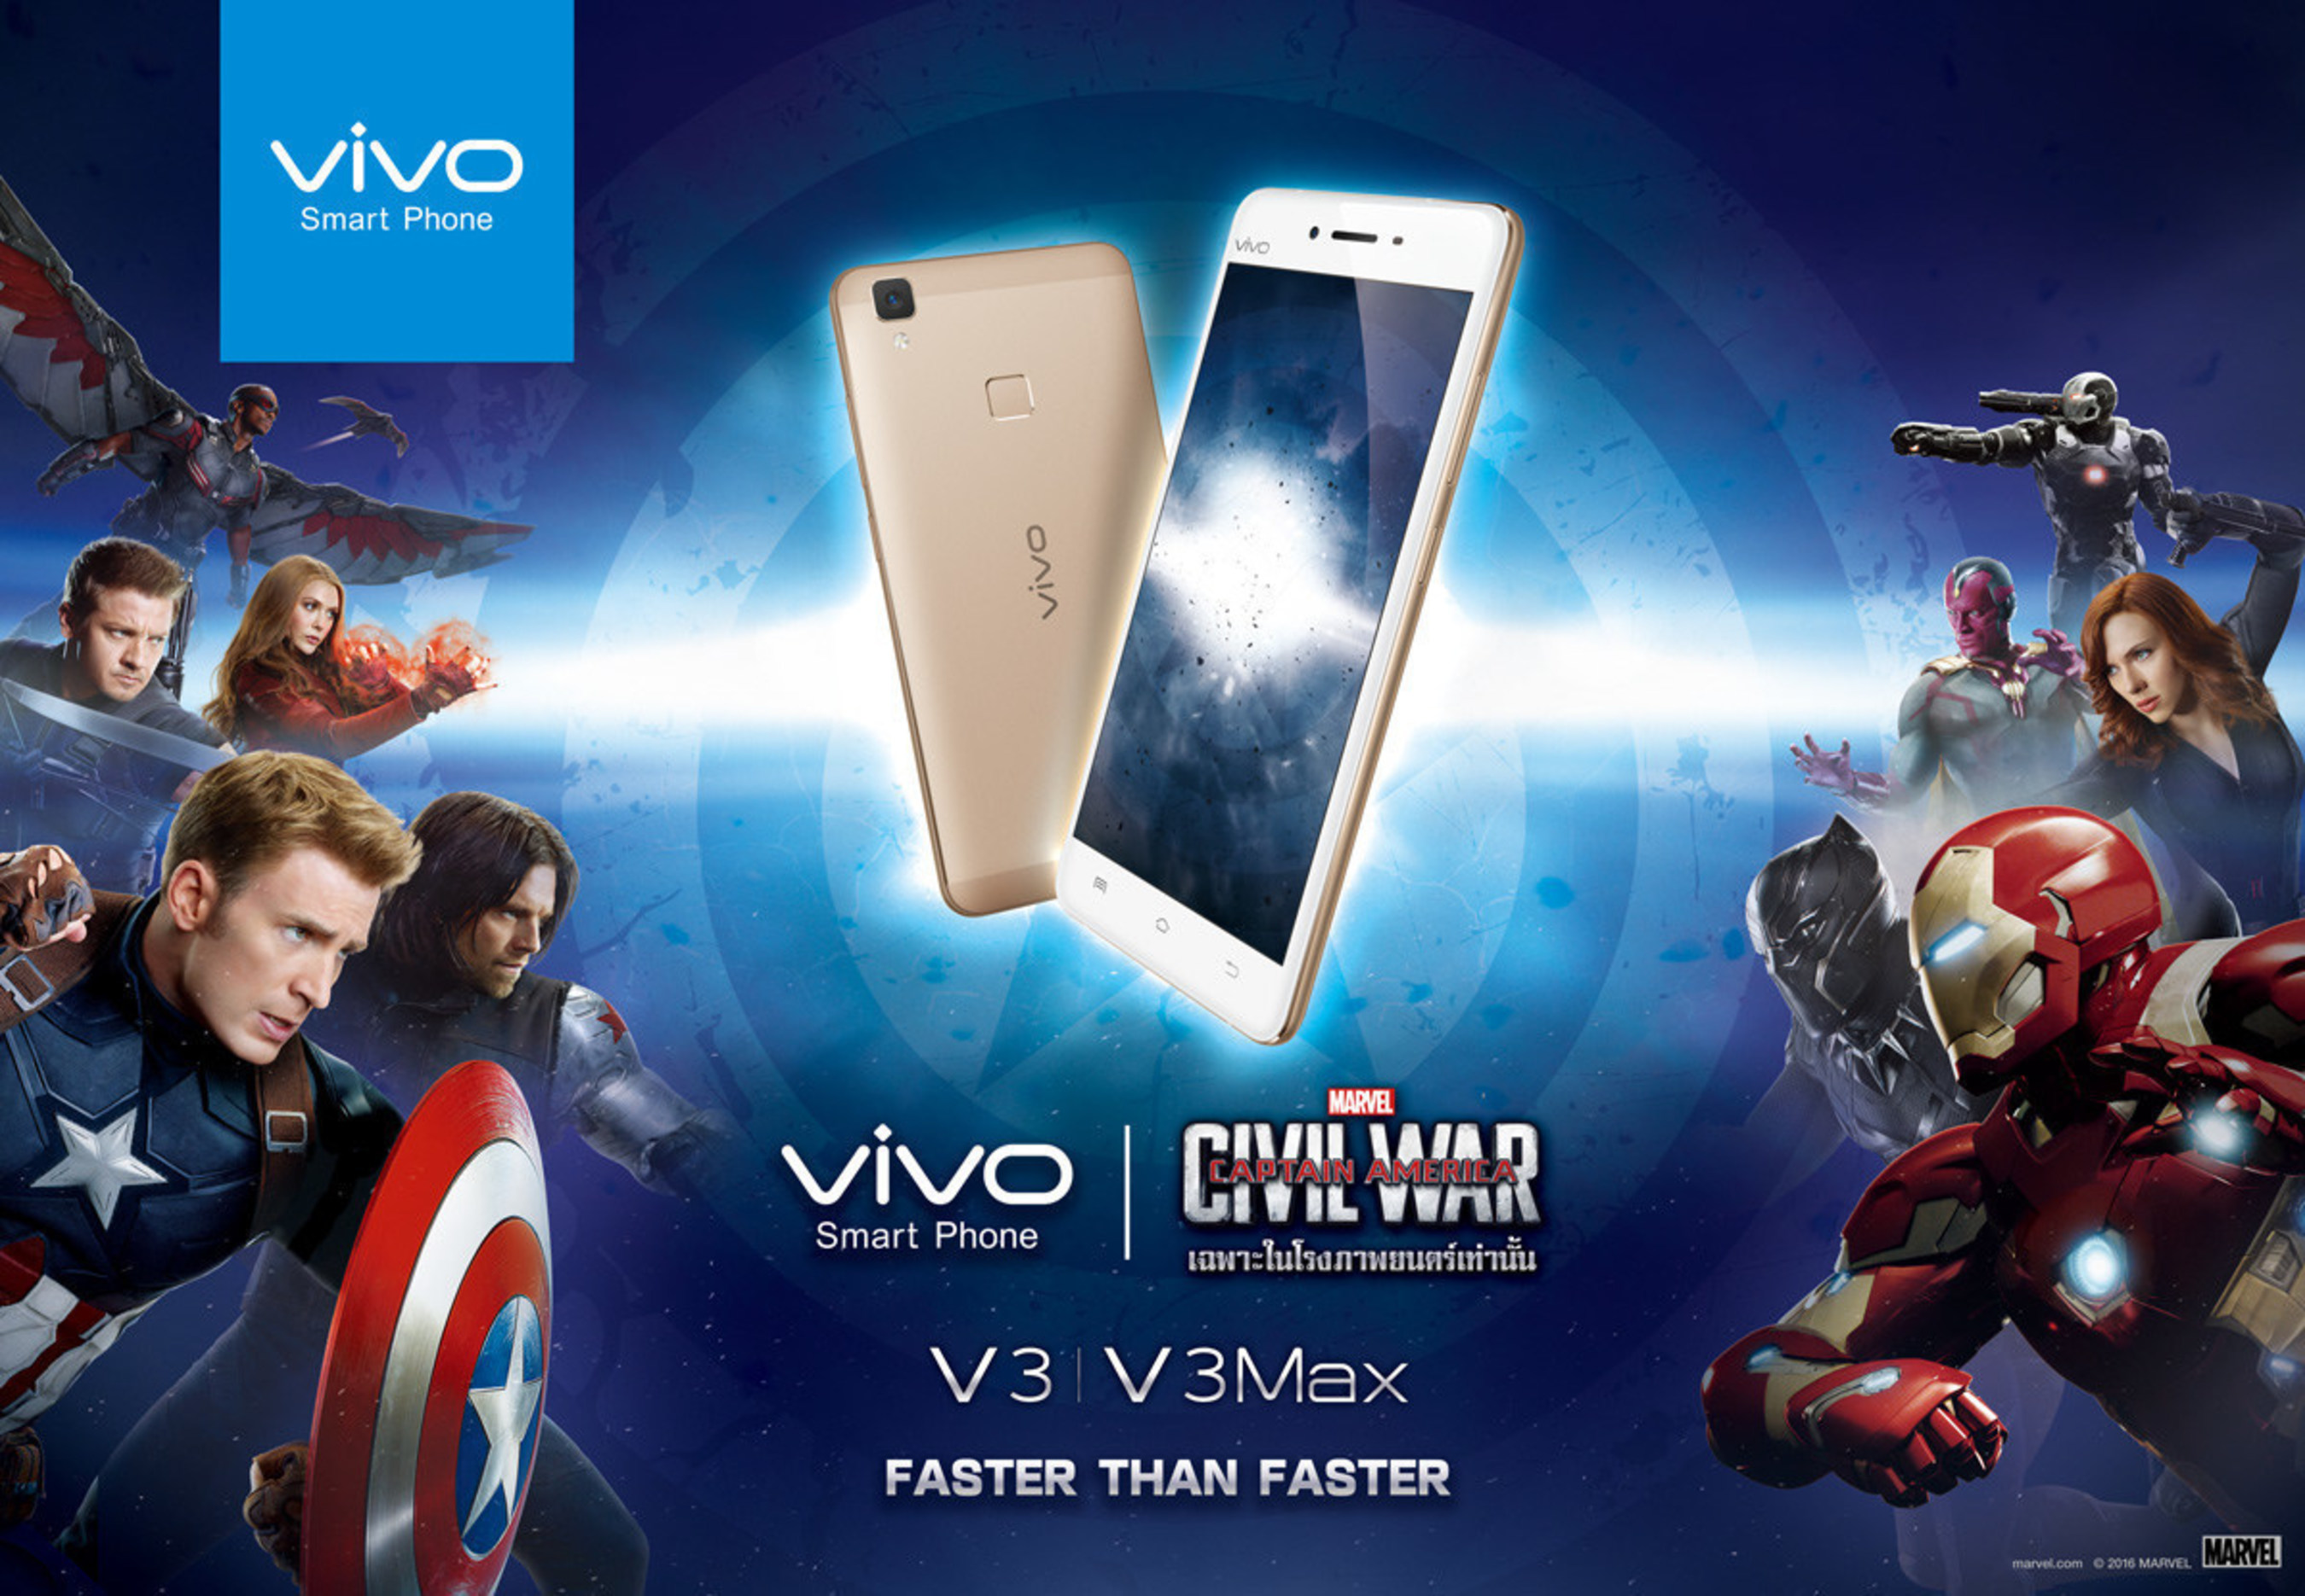 Vivo’s V3 and V3Max, used by super heroes Iron Man and Captain America in Captain America: Civil War, feature a simple design and premium hardware quality